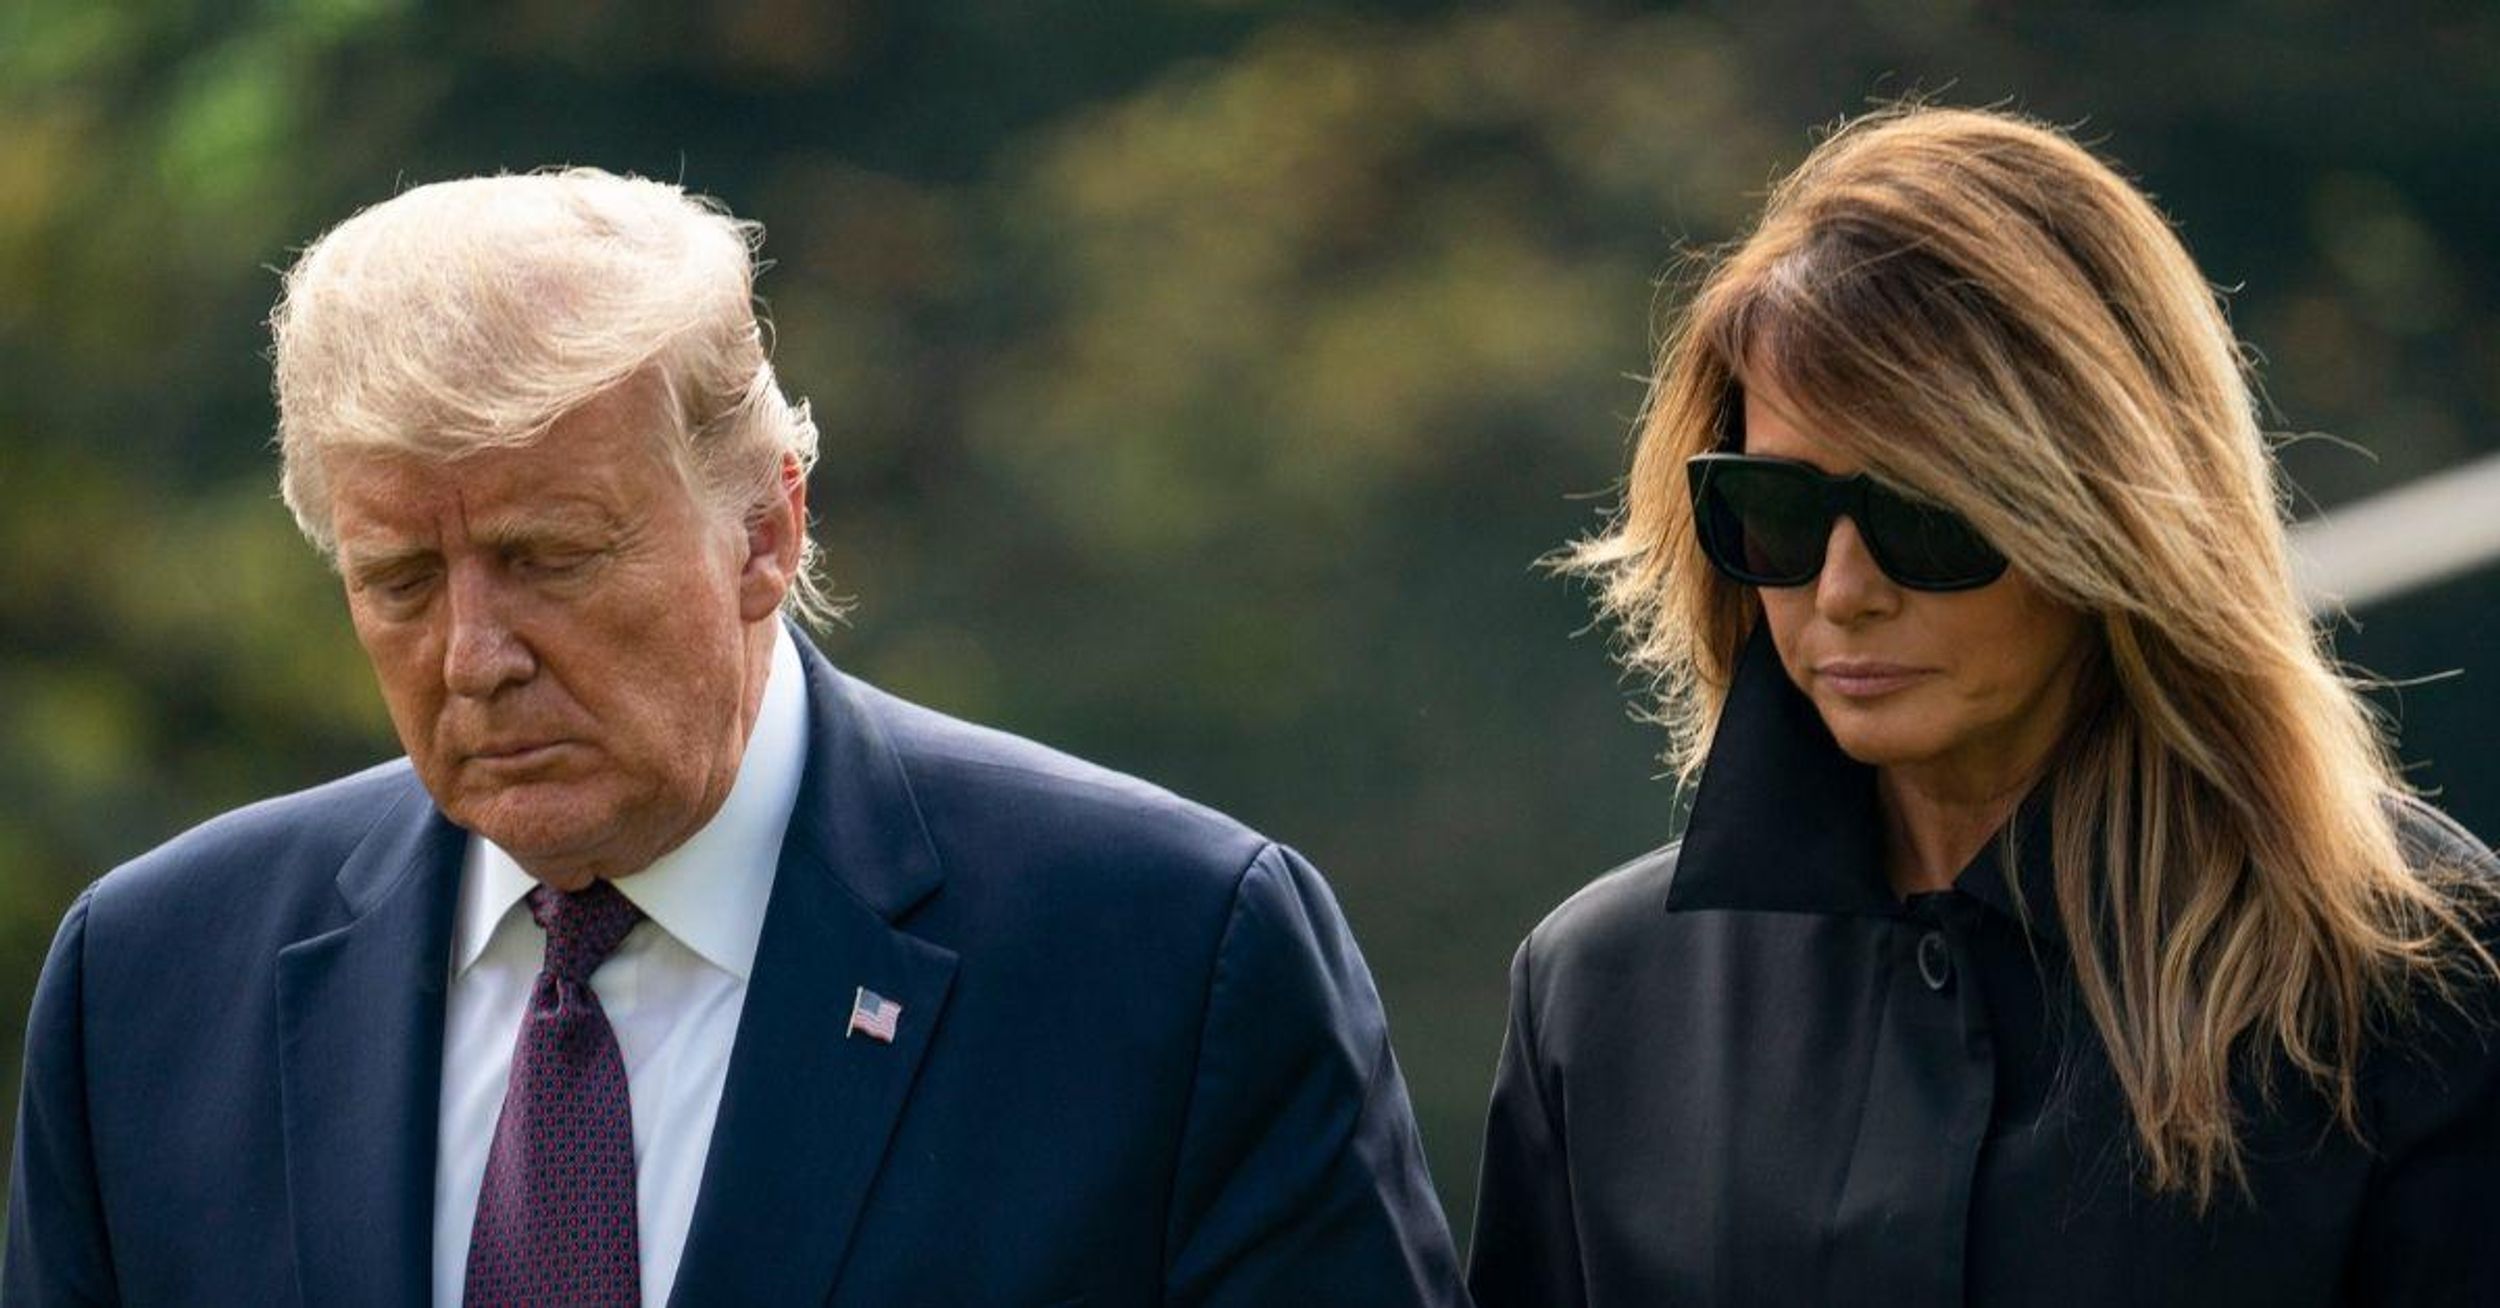 Melania Trump Delights Twitter After Her Valentine's Day Messages Make No Mention Of Donald